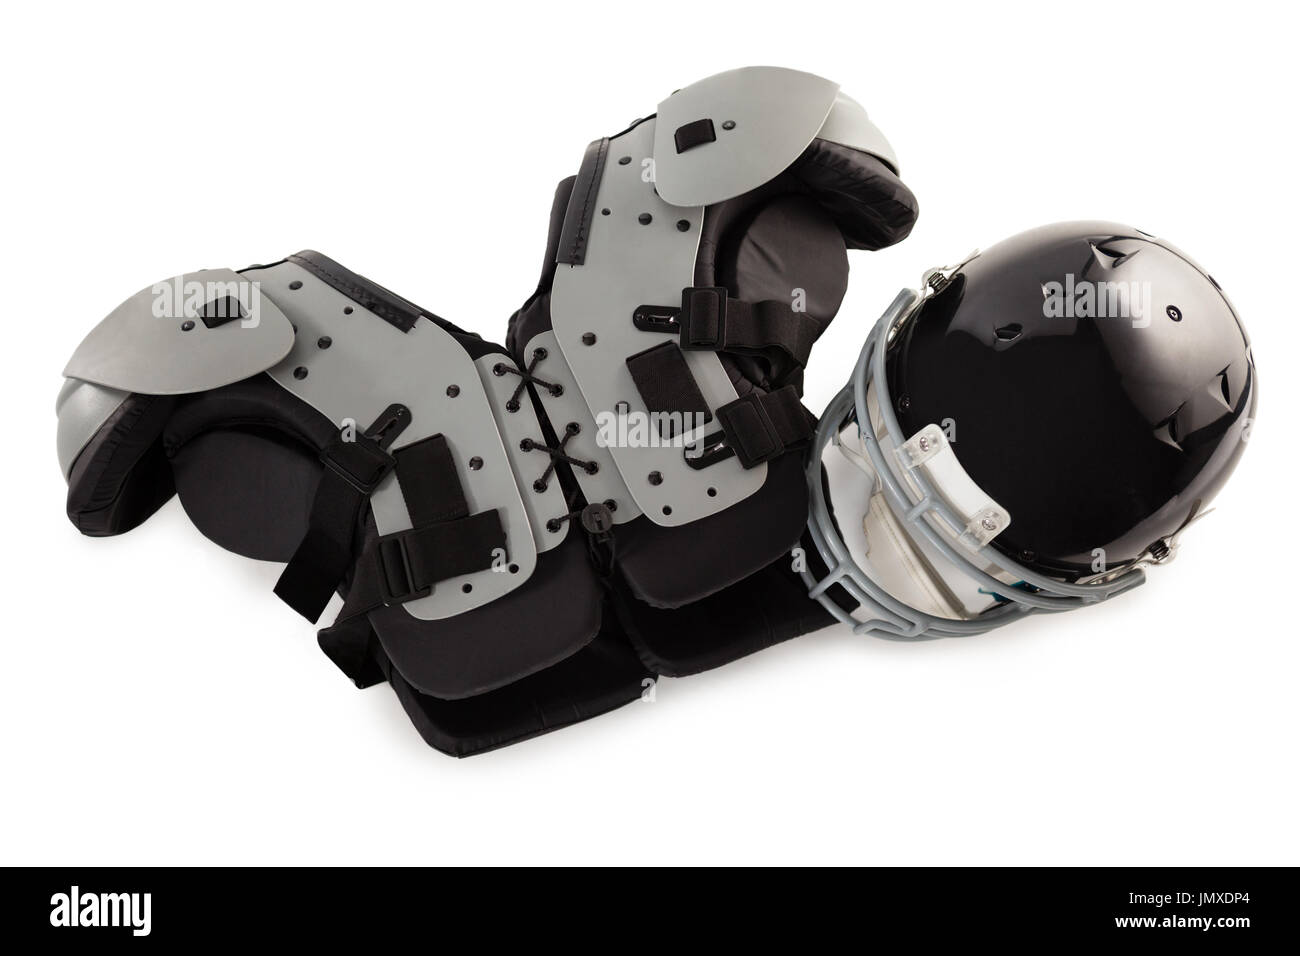 Chest protector with sports helmet on white background Stock Photo